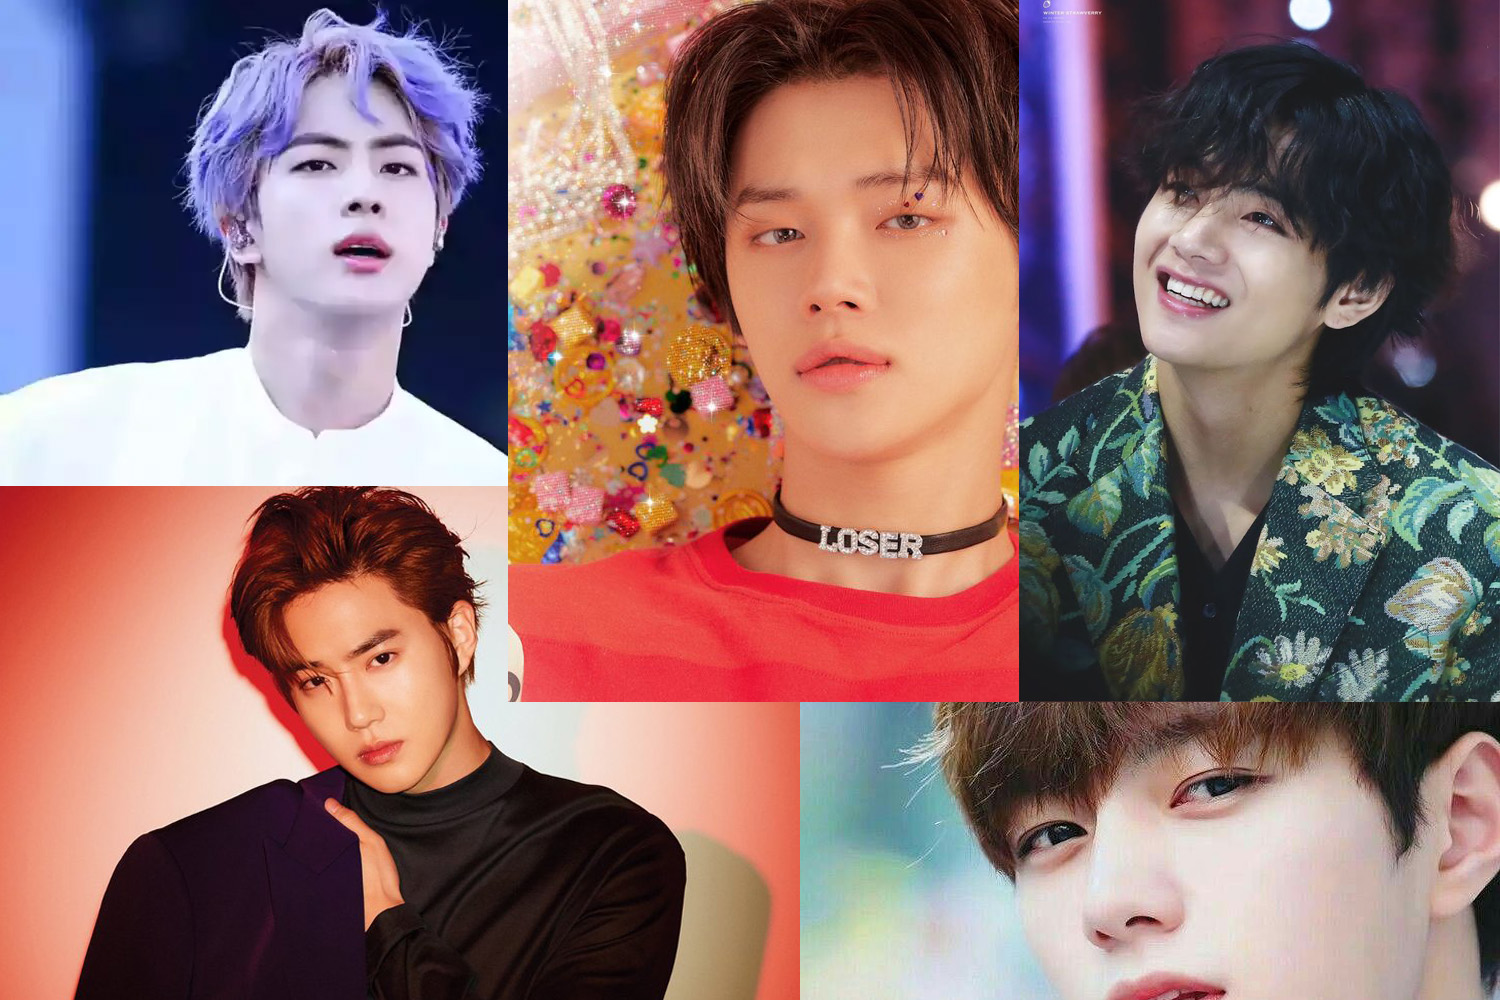 Who are the top 10 male visuals of K-pop according to you?